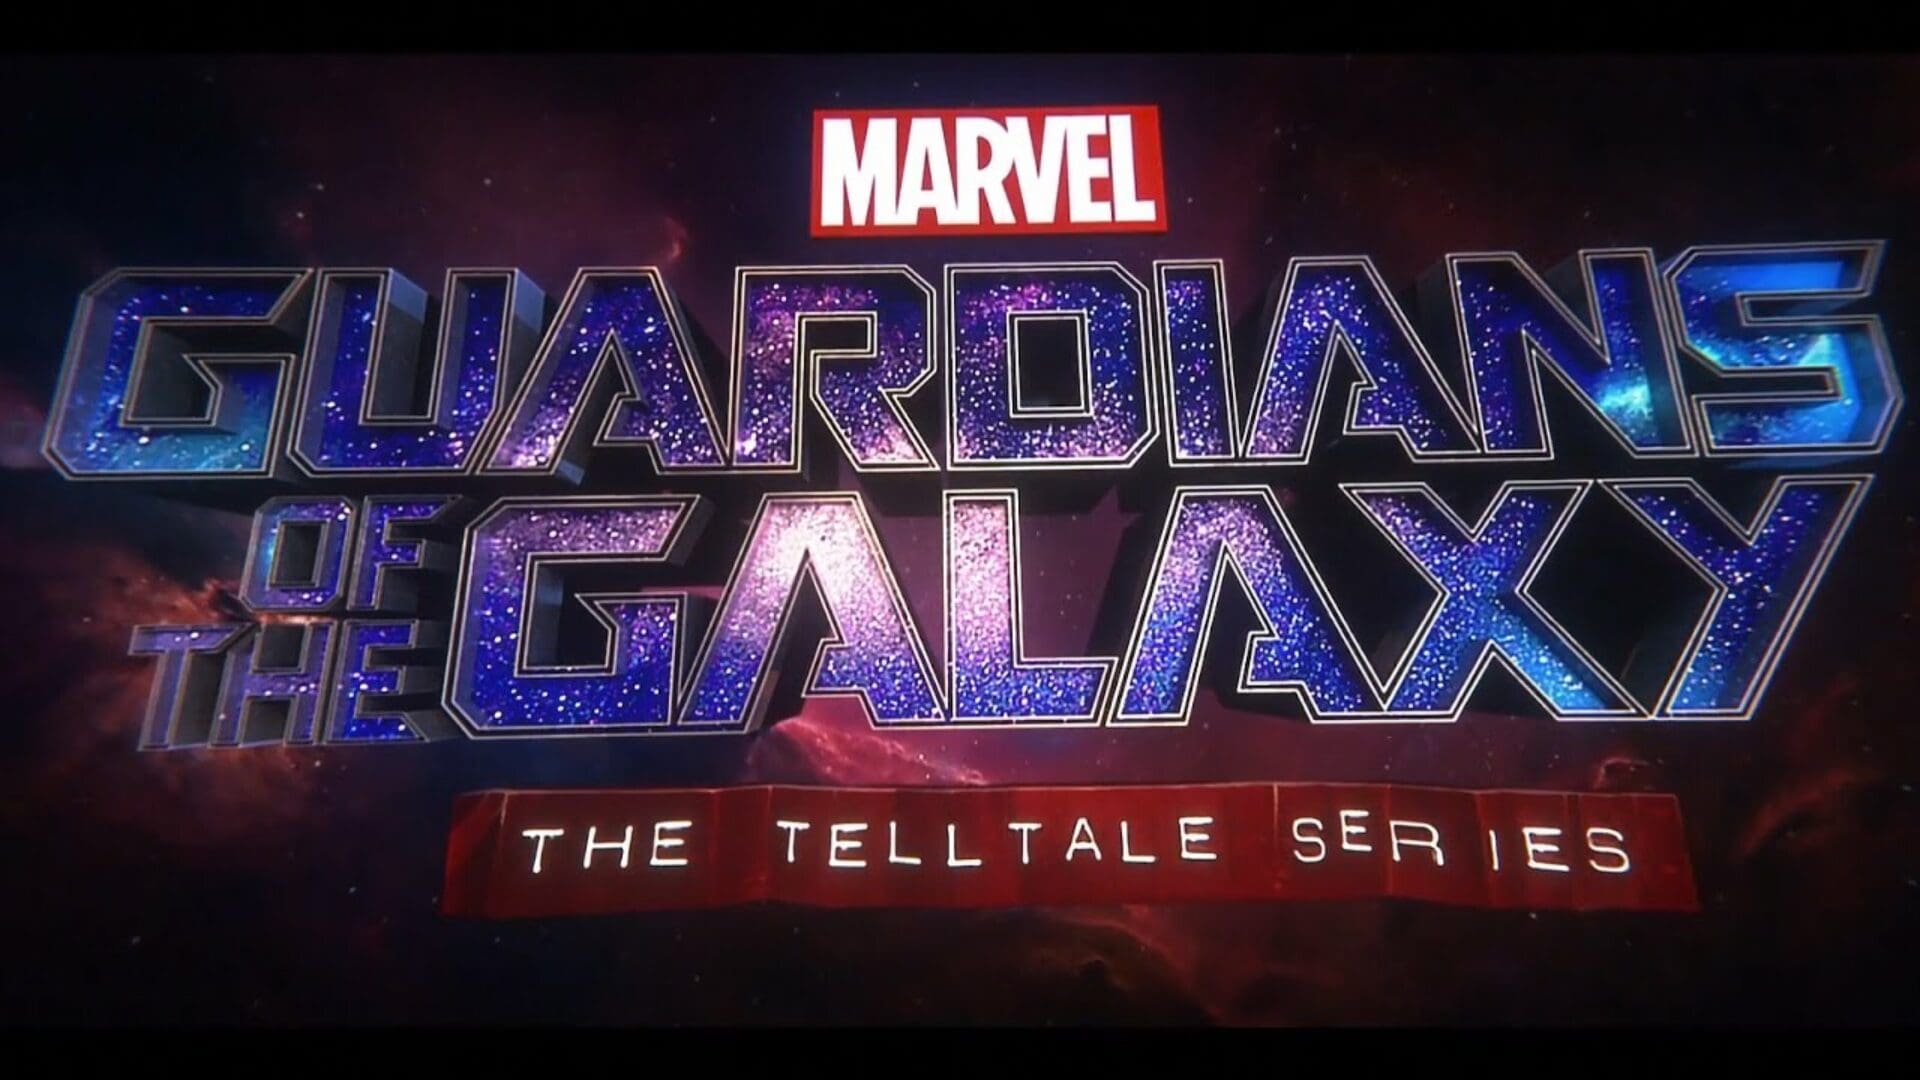 Telltale Games is Hooked on a Feeling with Guardians of the Galaxy: The Telltale Series